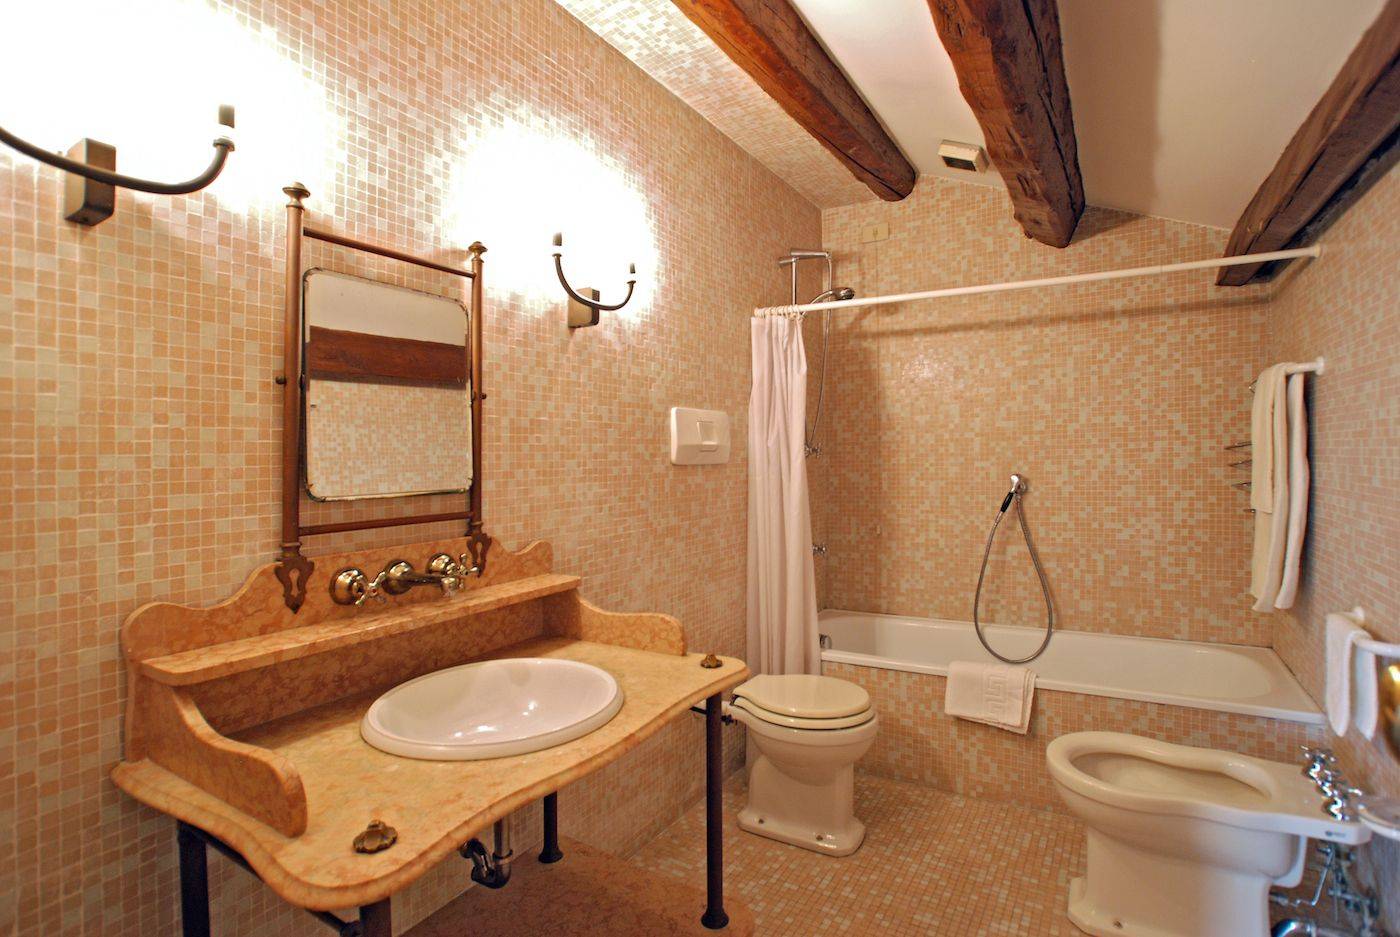 the elegant bathroom of the attic with bathtub and mosaic tiles